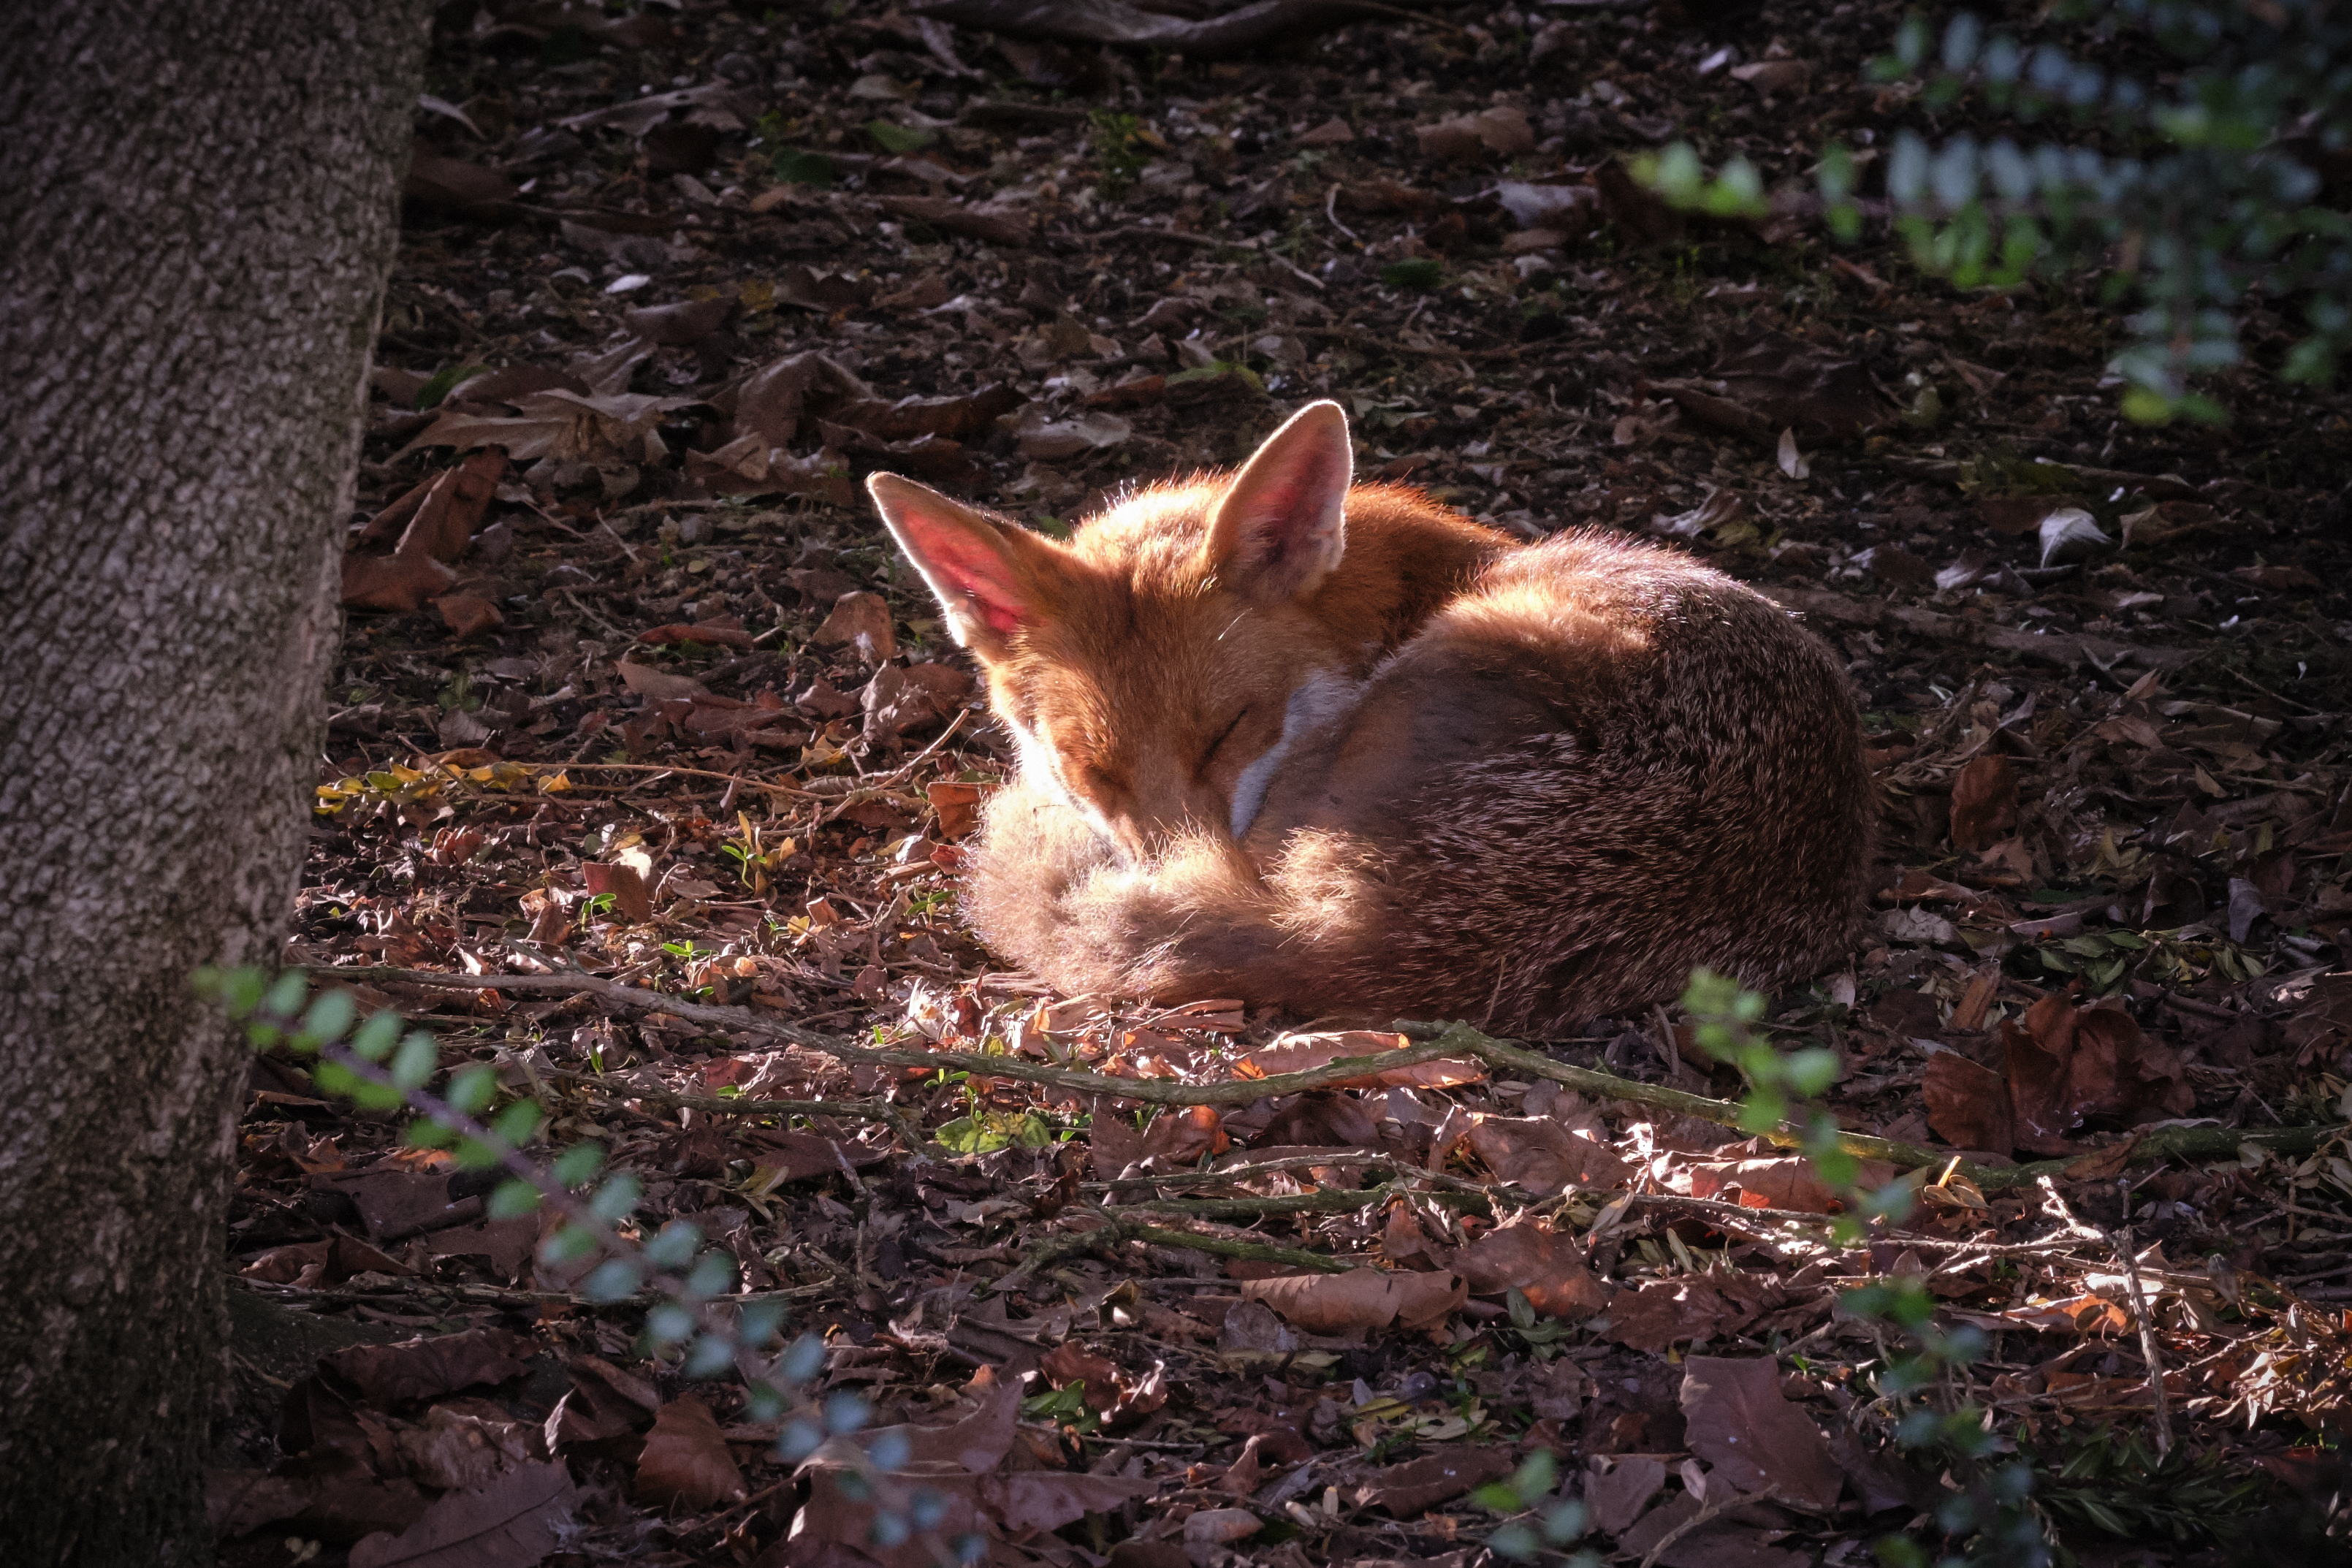 Fow curled up in the leaves